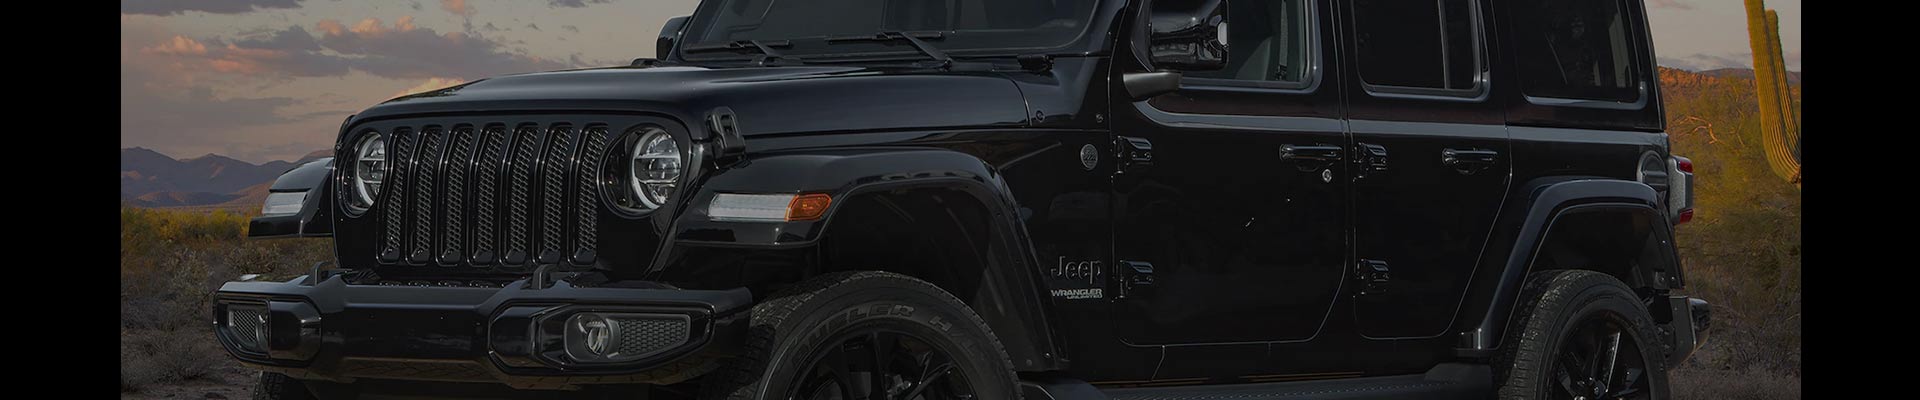 Shop Replacement and OEM 2004 Jeep Wrangler Parts with Discounted Price on the Net